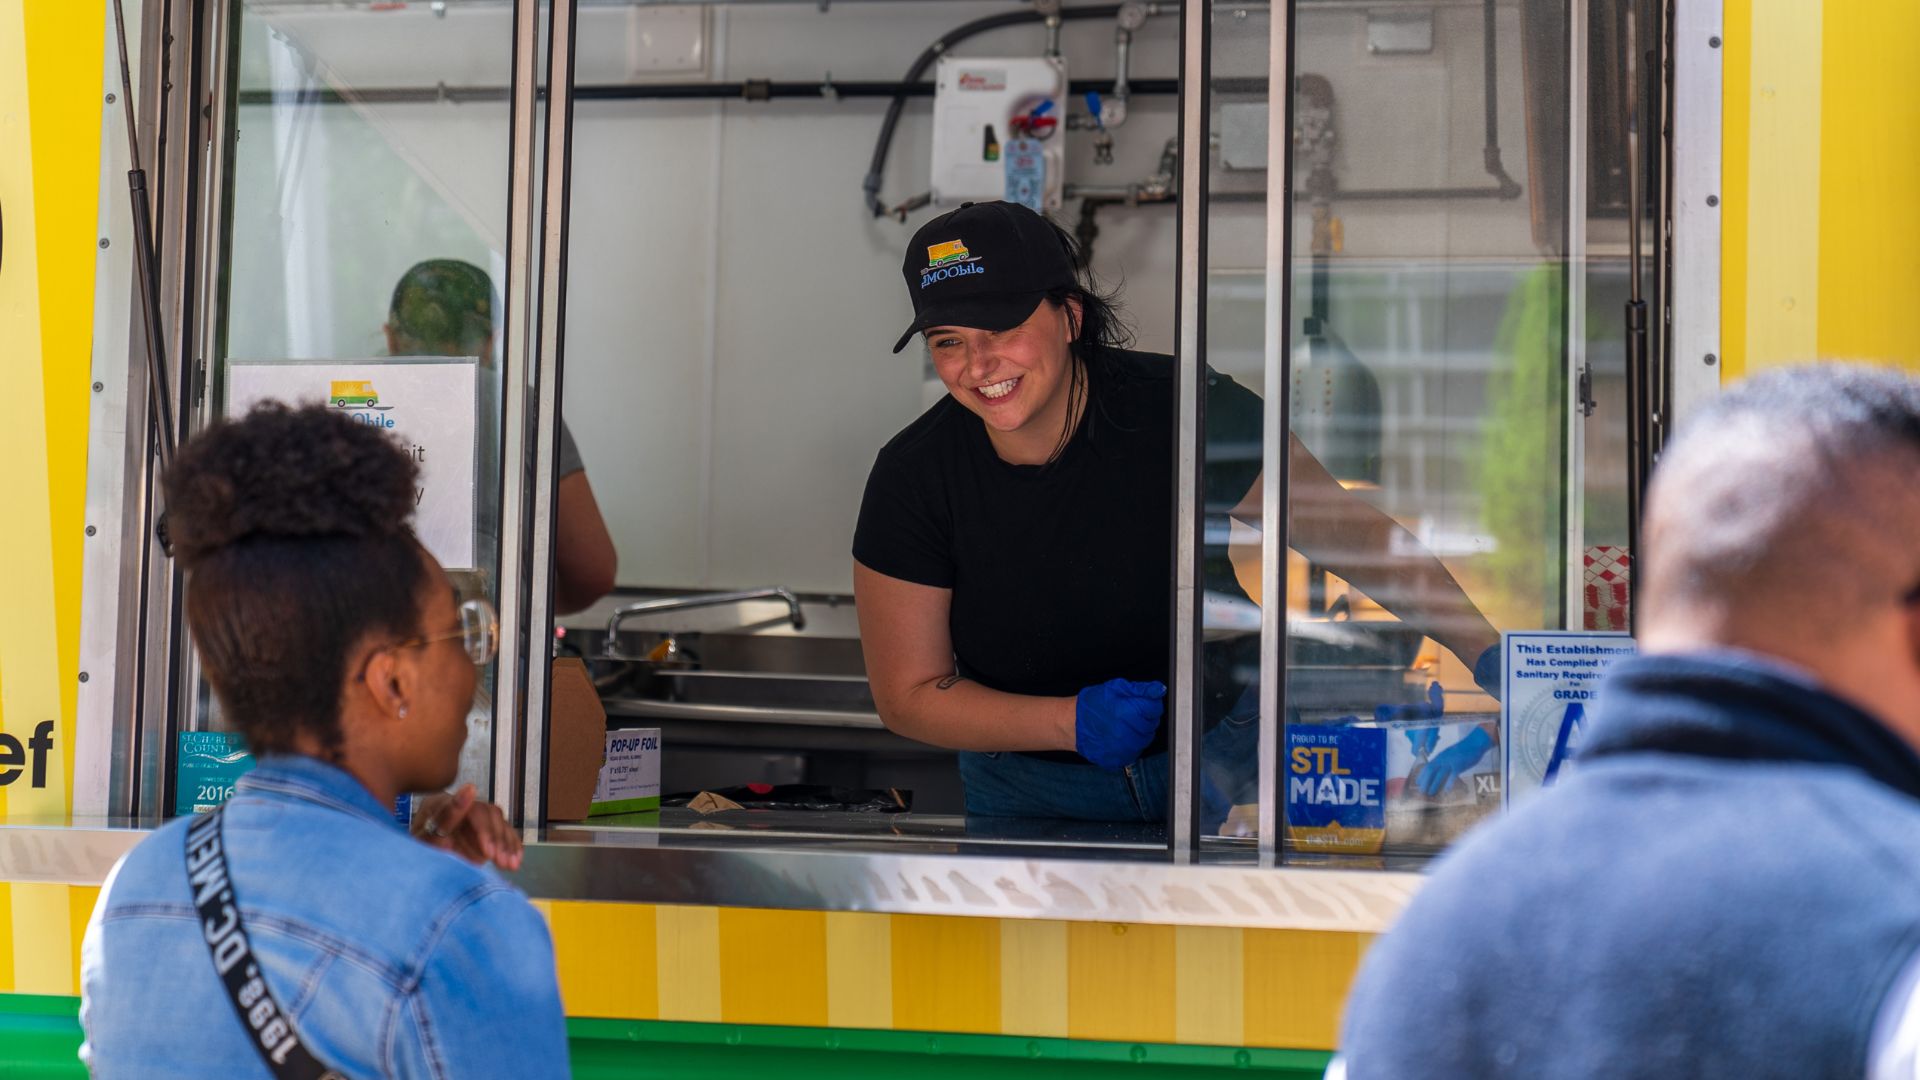 A smiling worker serves smash burgers from The MOObile food truck.